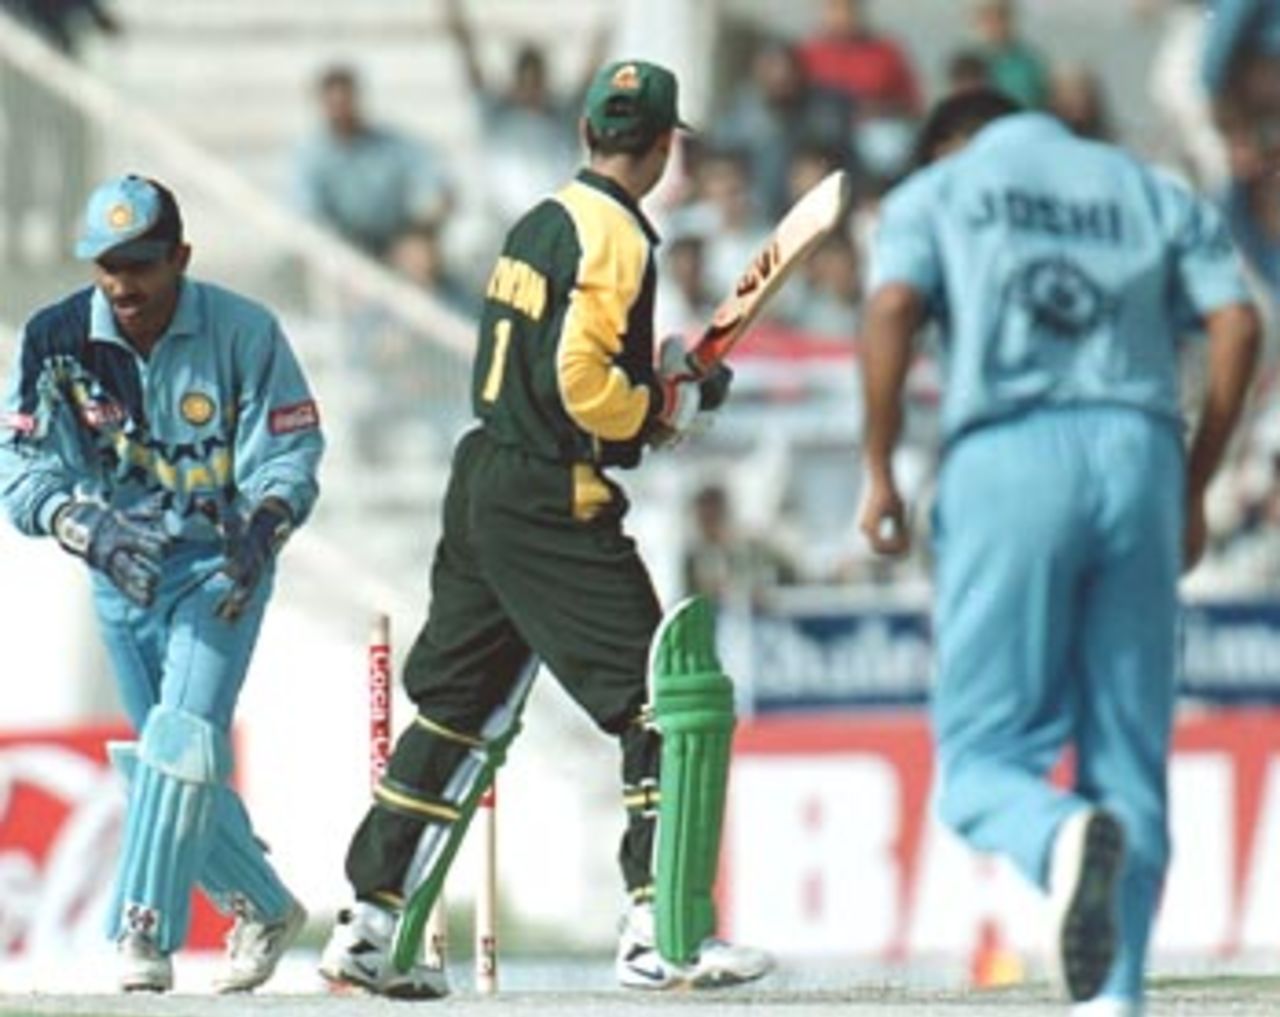 Imran Nazir looks down at the stumps after being bowled by Joshi India v Pakistan, Coca-Cola Cup, 1999/00, Sharjah C.A. Stadium, 23 March 2000